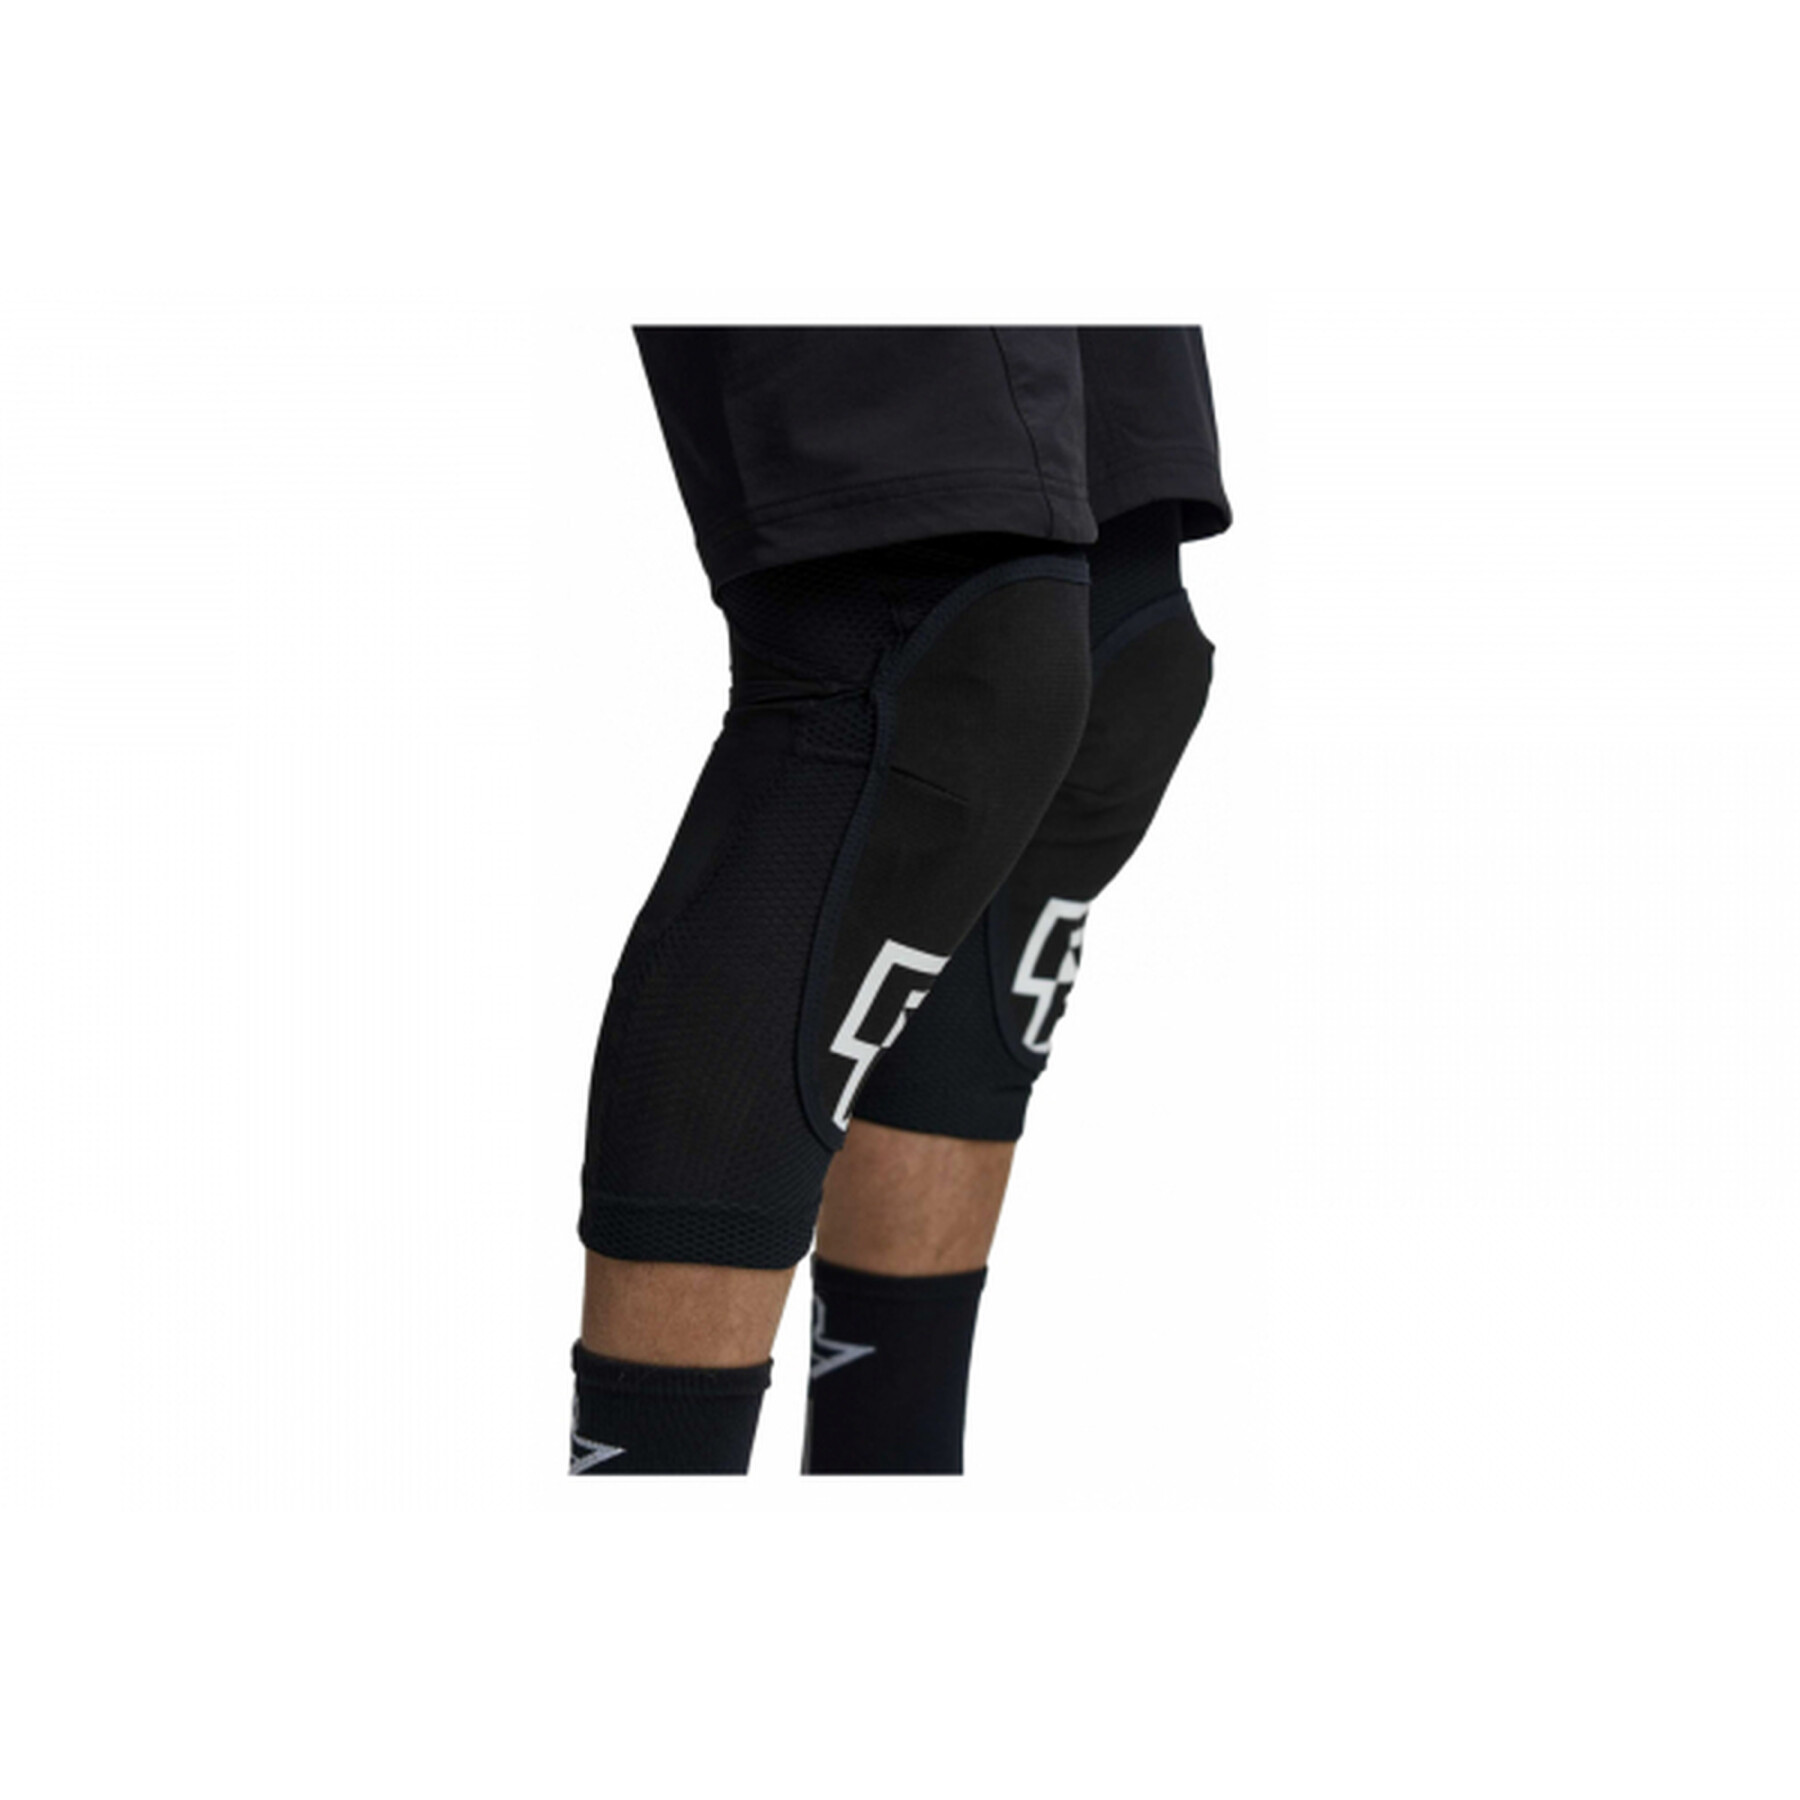 Knee pads Race Face Covert Stealth